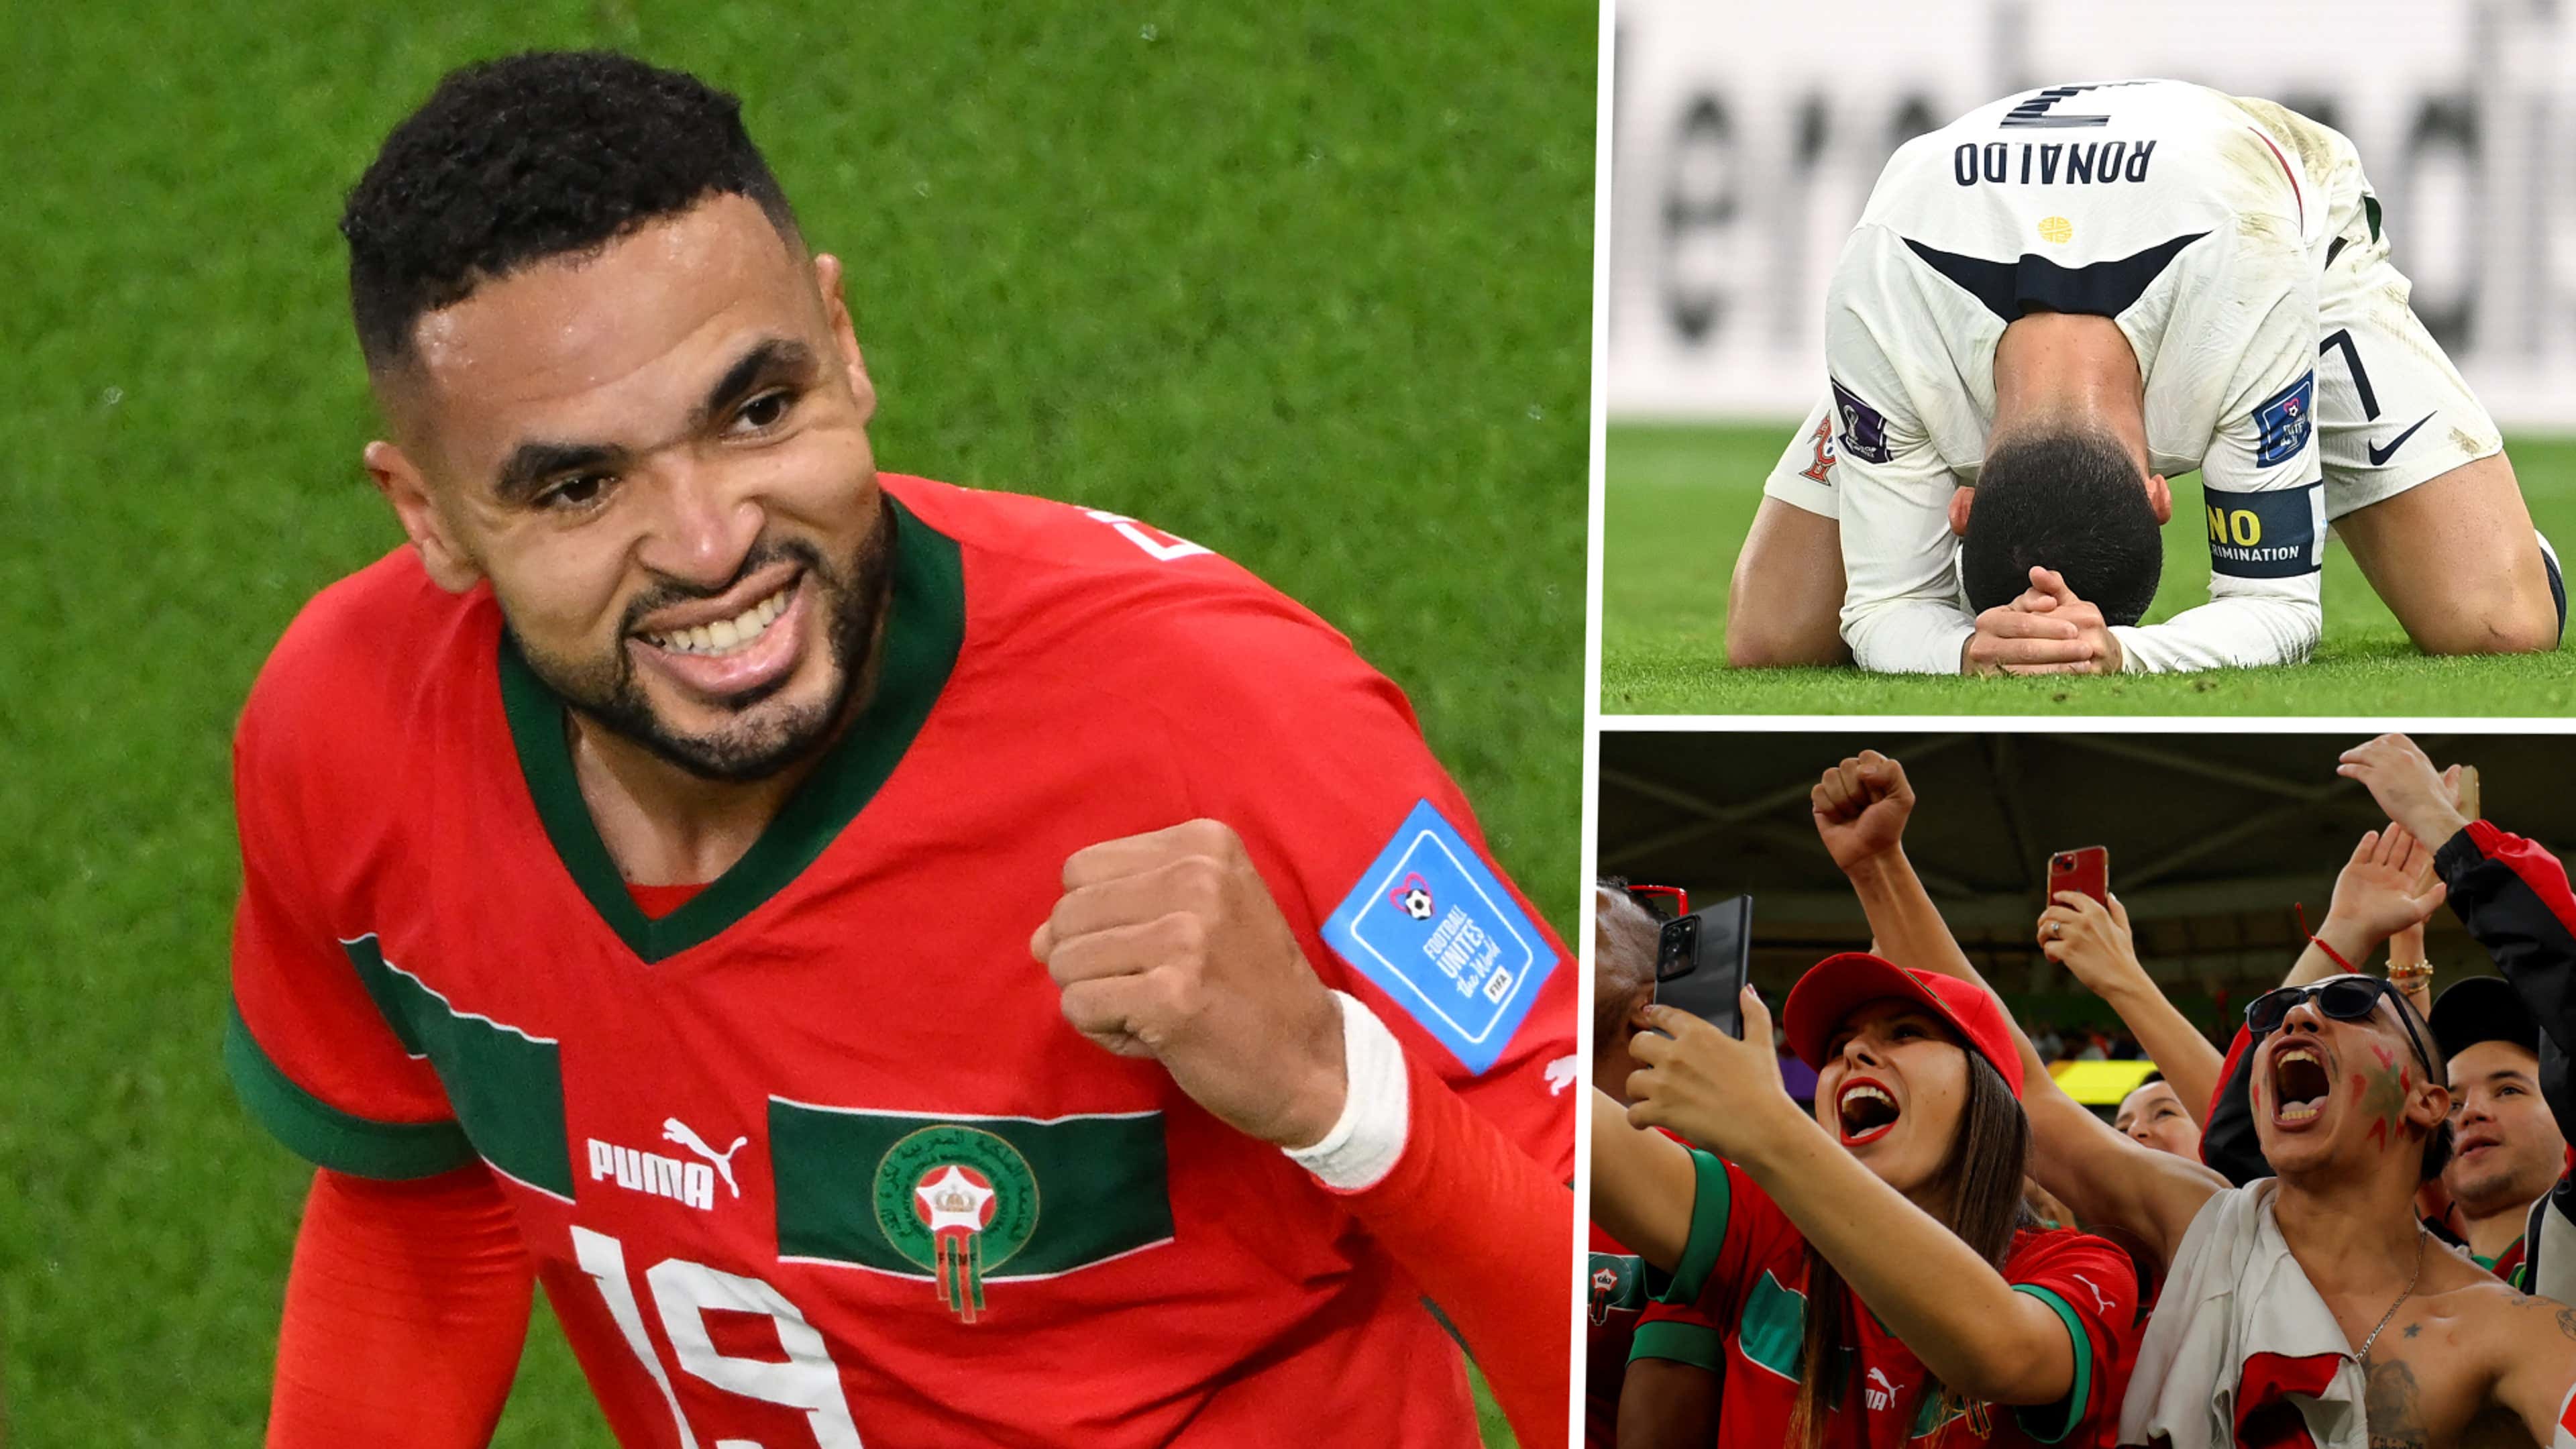 Cristiano Ronaldo's Insane Hat Trick Carries Portugal To The World Cup